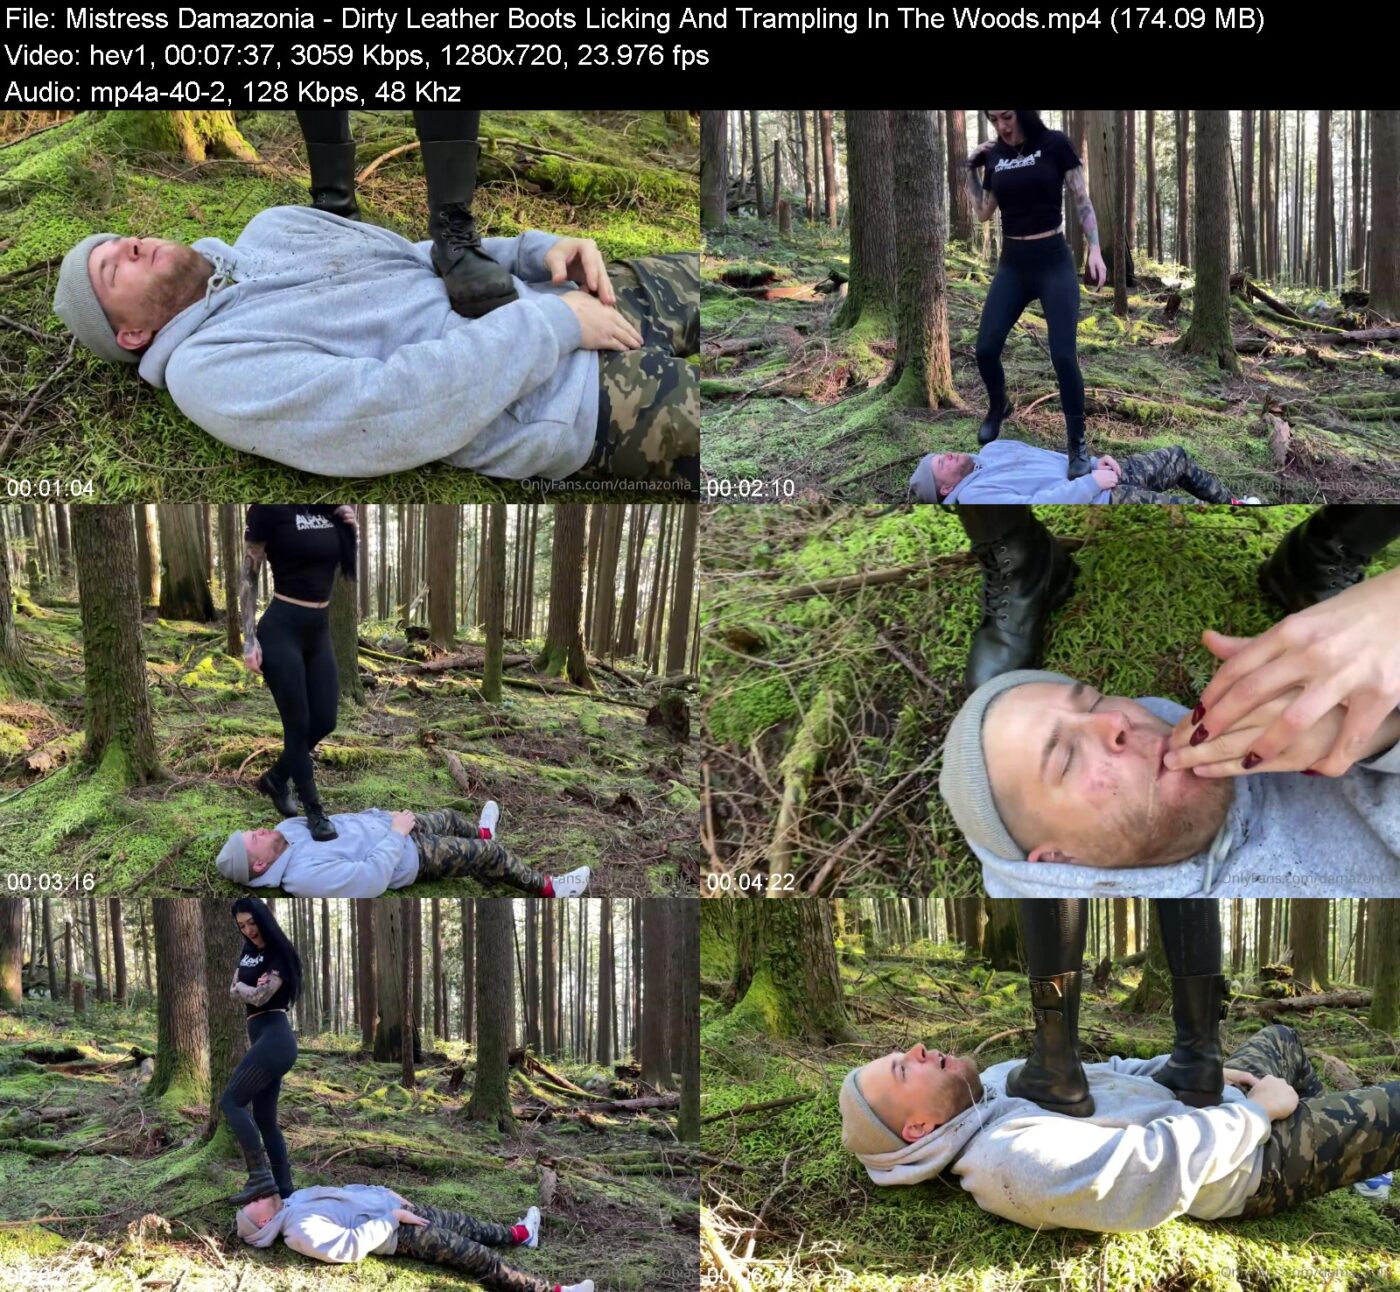 Actress: Mistress Damazonia. Title and Studio: Dirty Leather Boots Licking And Trampling In The Woods